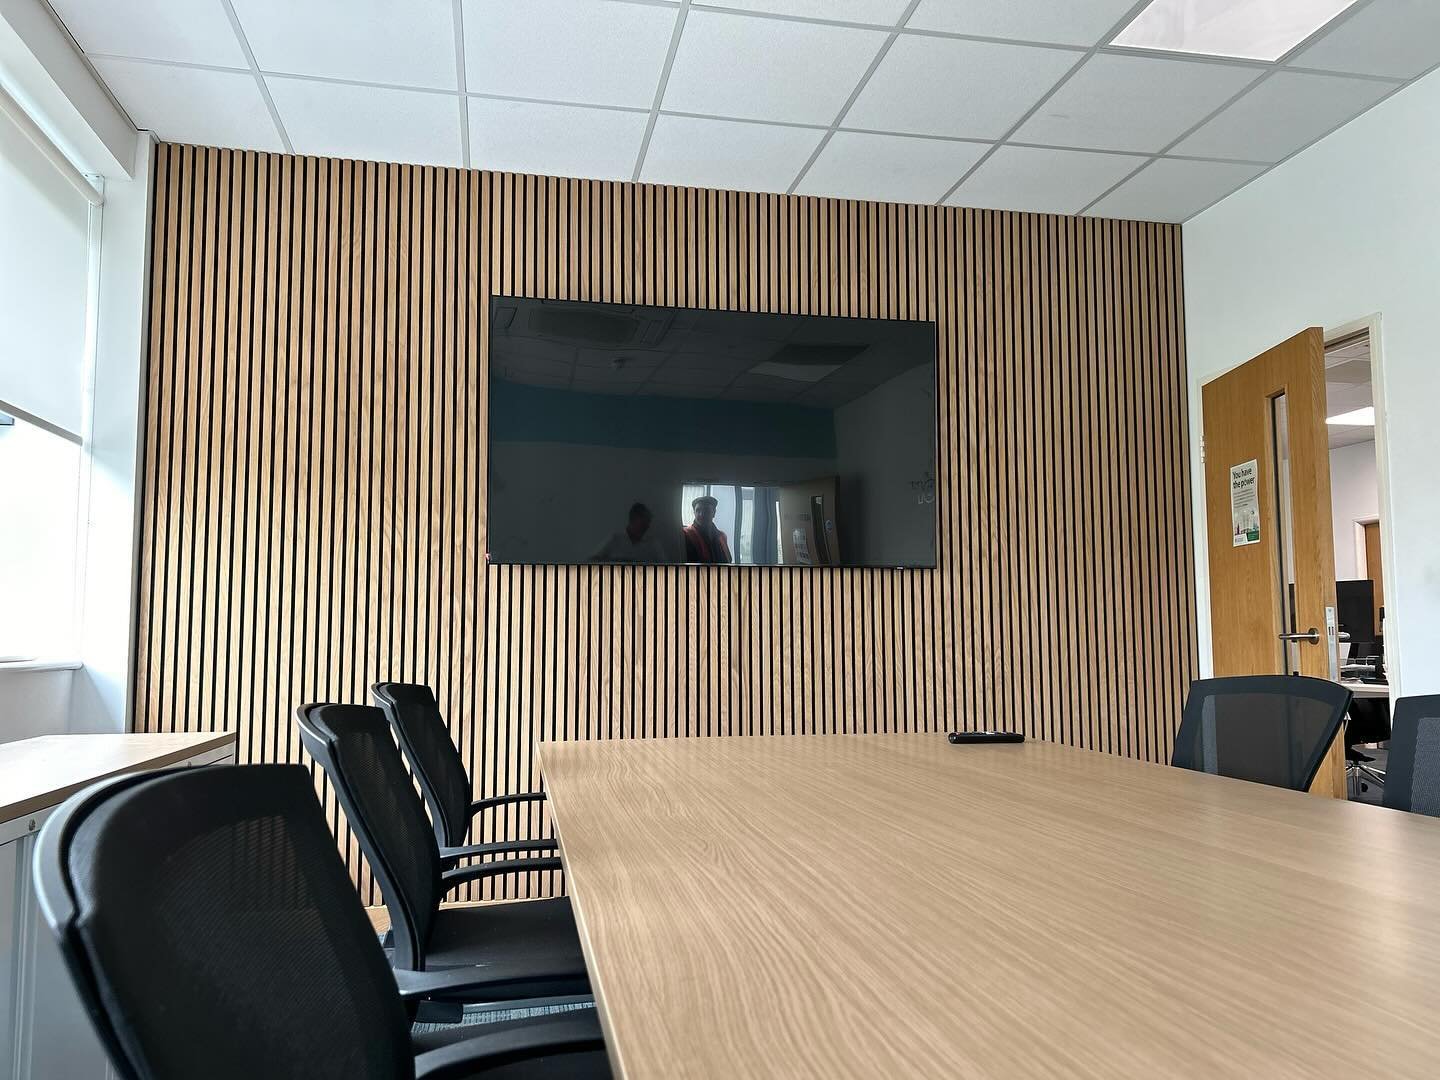 Panel Wall &amp; Samsung 75&rdquo; television installation completed today in this meeting room.

If you are looking for a bespoke Feature Wall give us a call for a FREE quote.

Check us out at www.ultravision.info
Or call Pete on 07904 487 426

#med